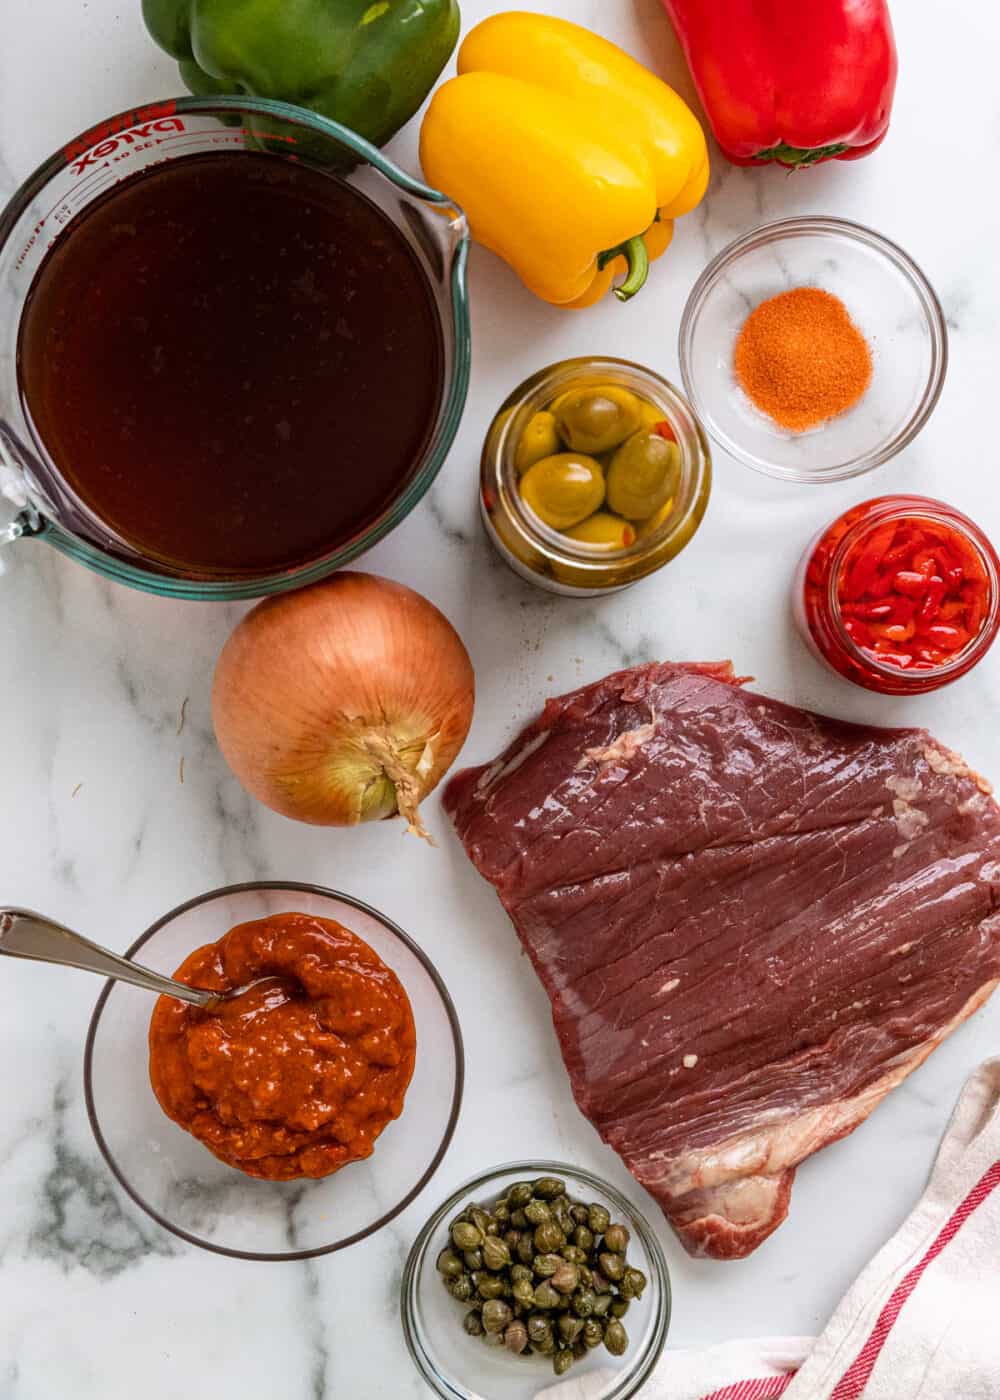 ingredients to make Cuba's national dish, spicy shredded beef